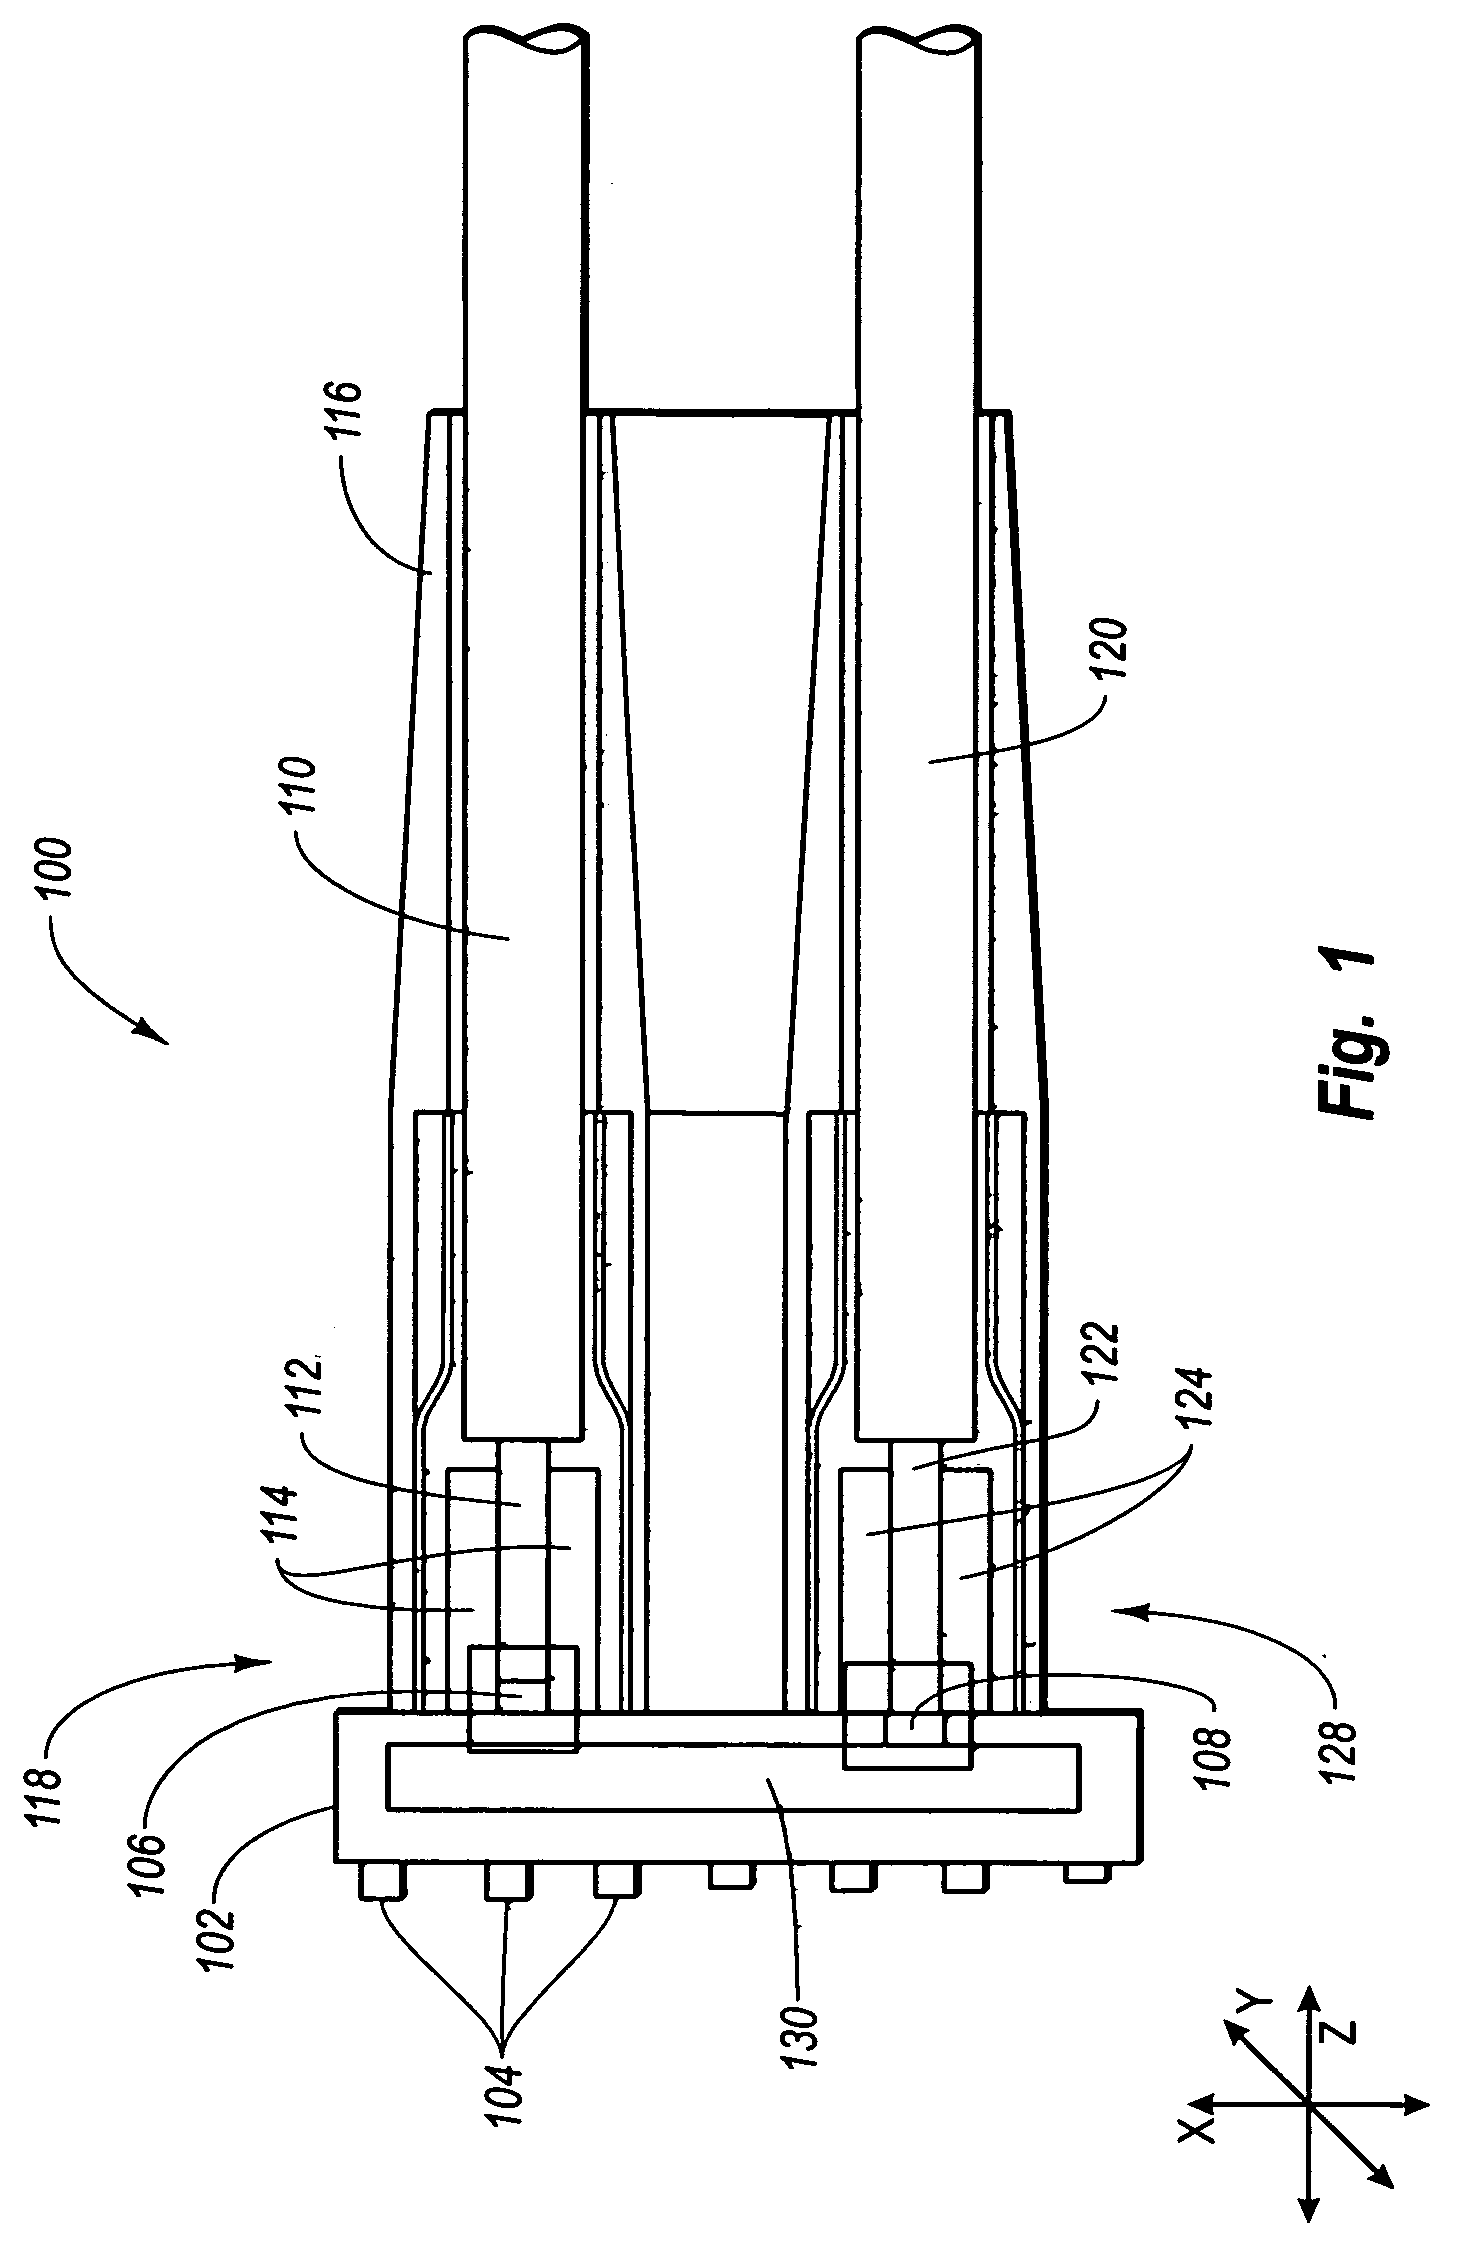 Optical connectors for electronic devices